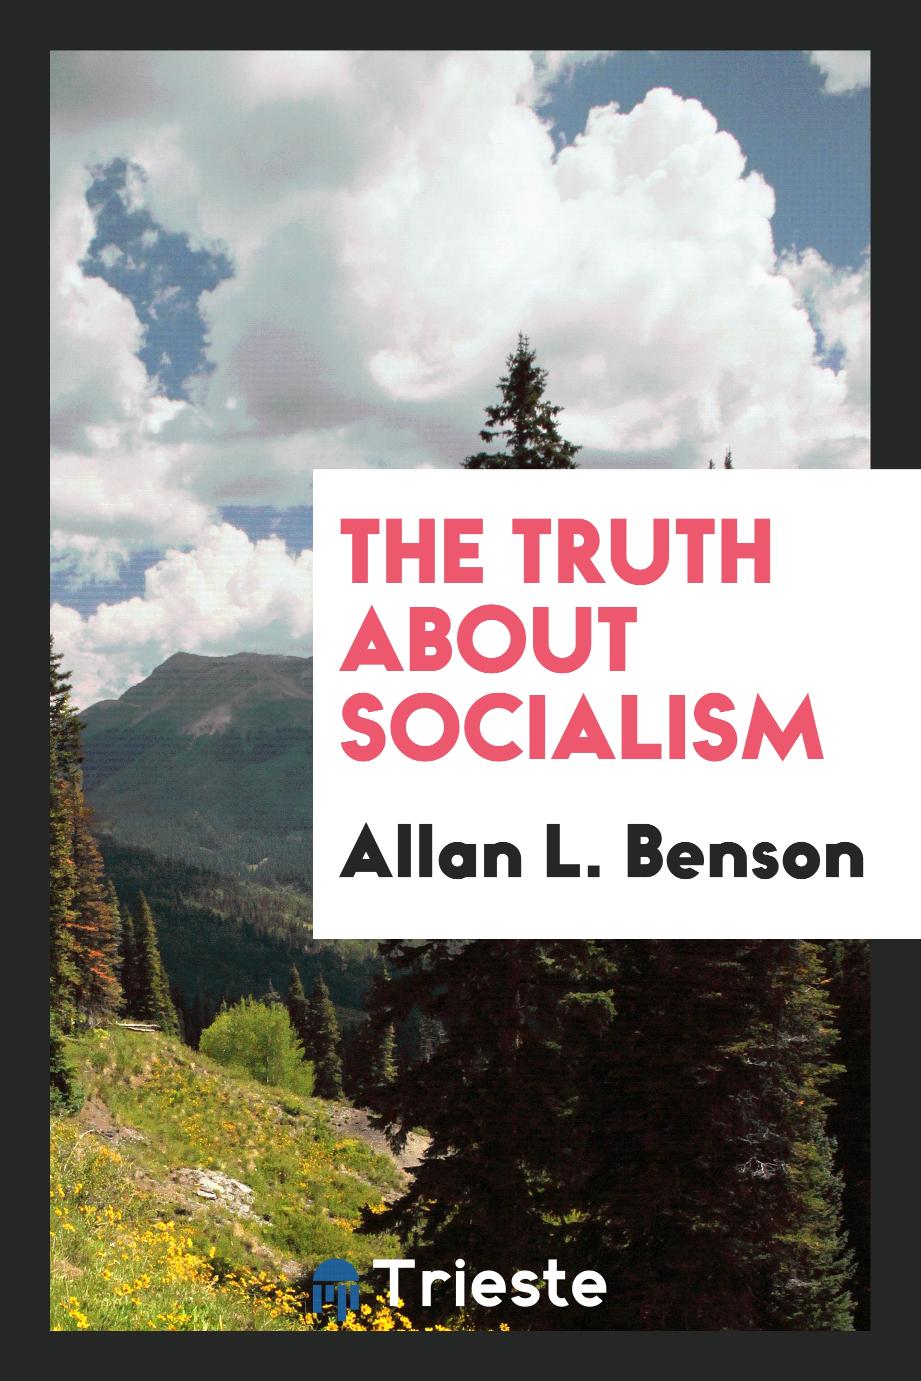 The truth about socialism